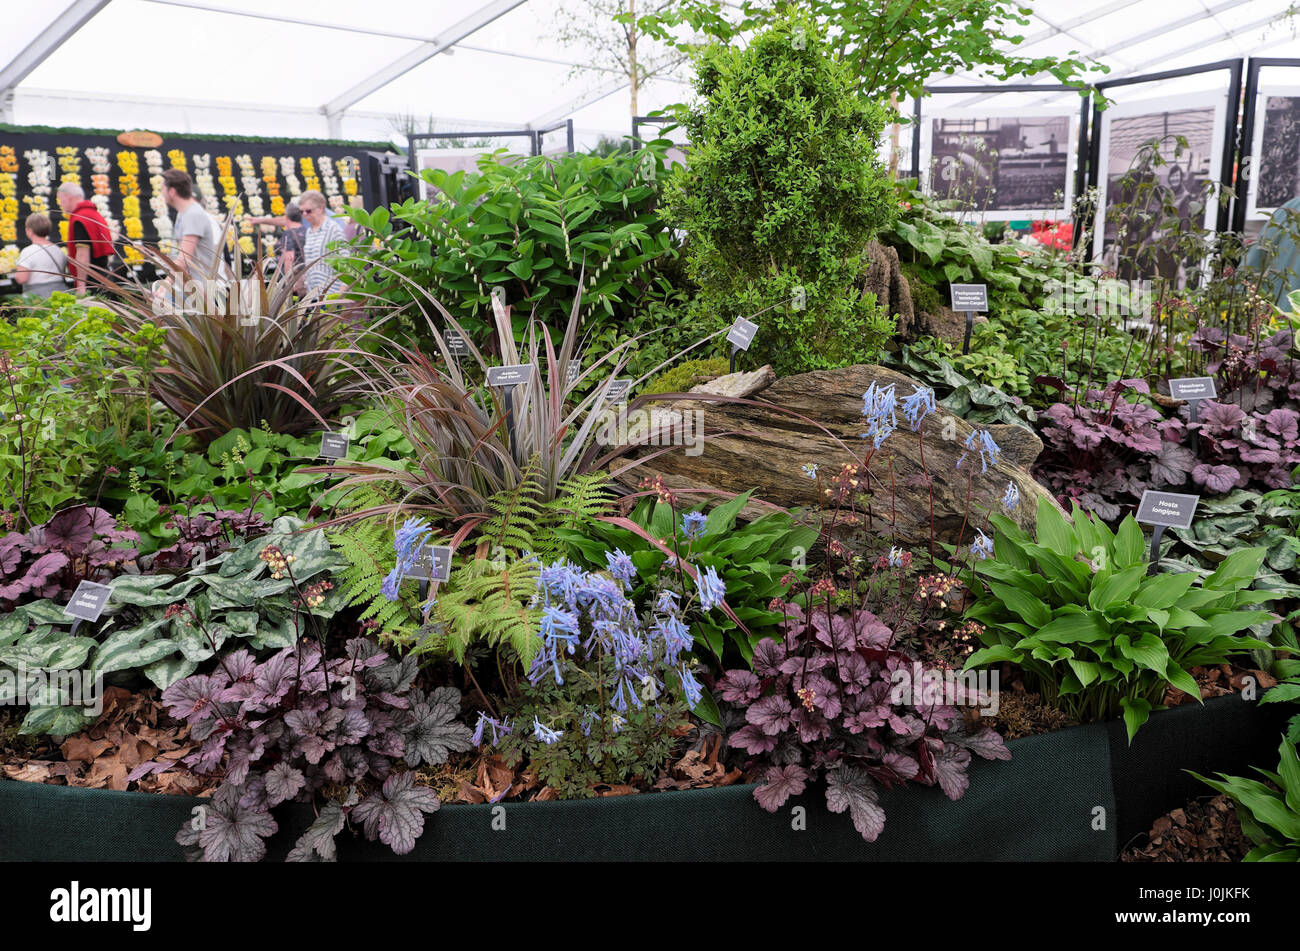 Woodland show garden display with plants for growing in shade in the marquis at the RHS Flower Show Cardiff, Wales UK   KATHY DEWITT Stock Photo